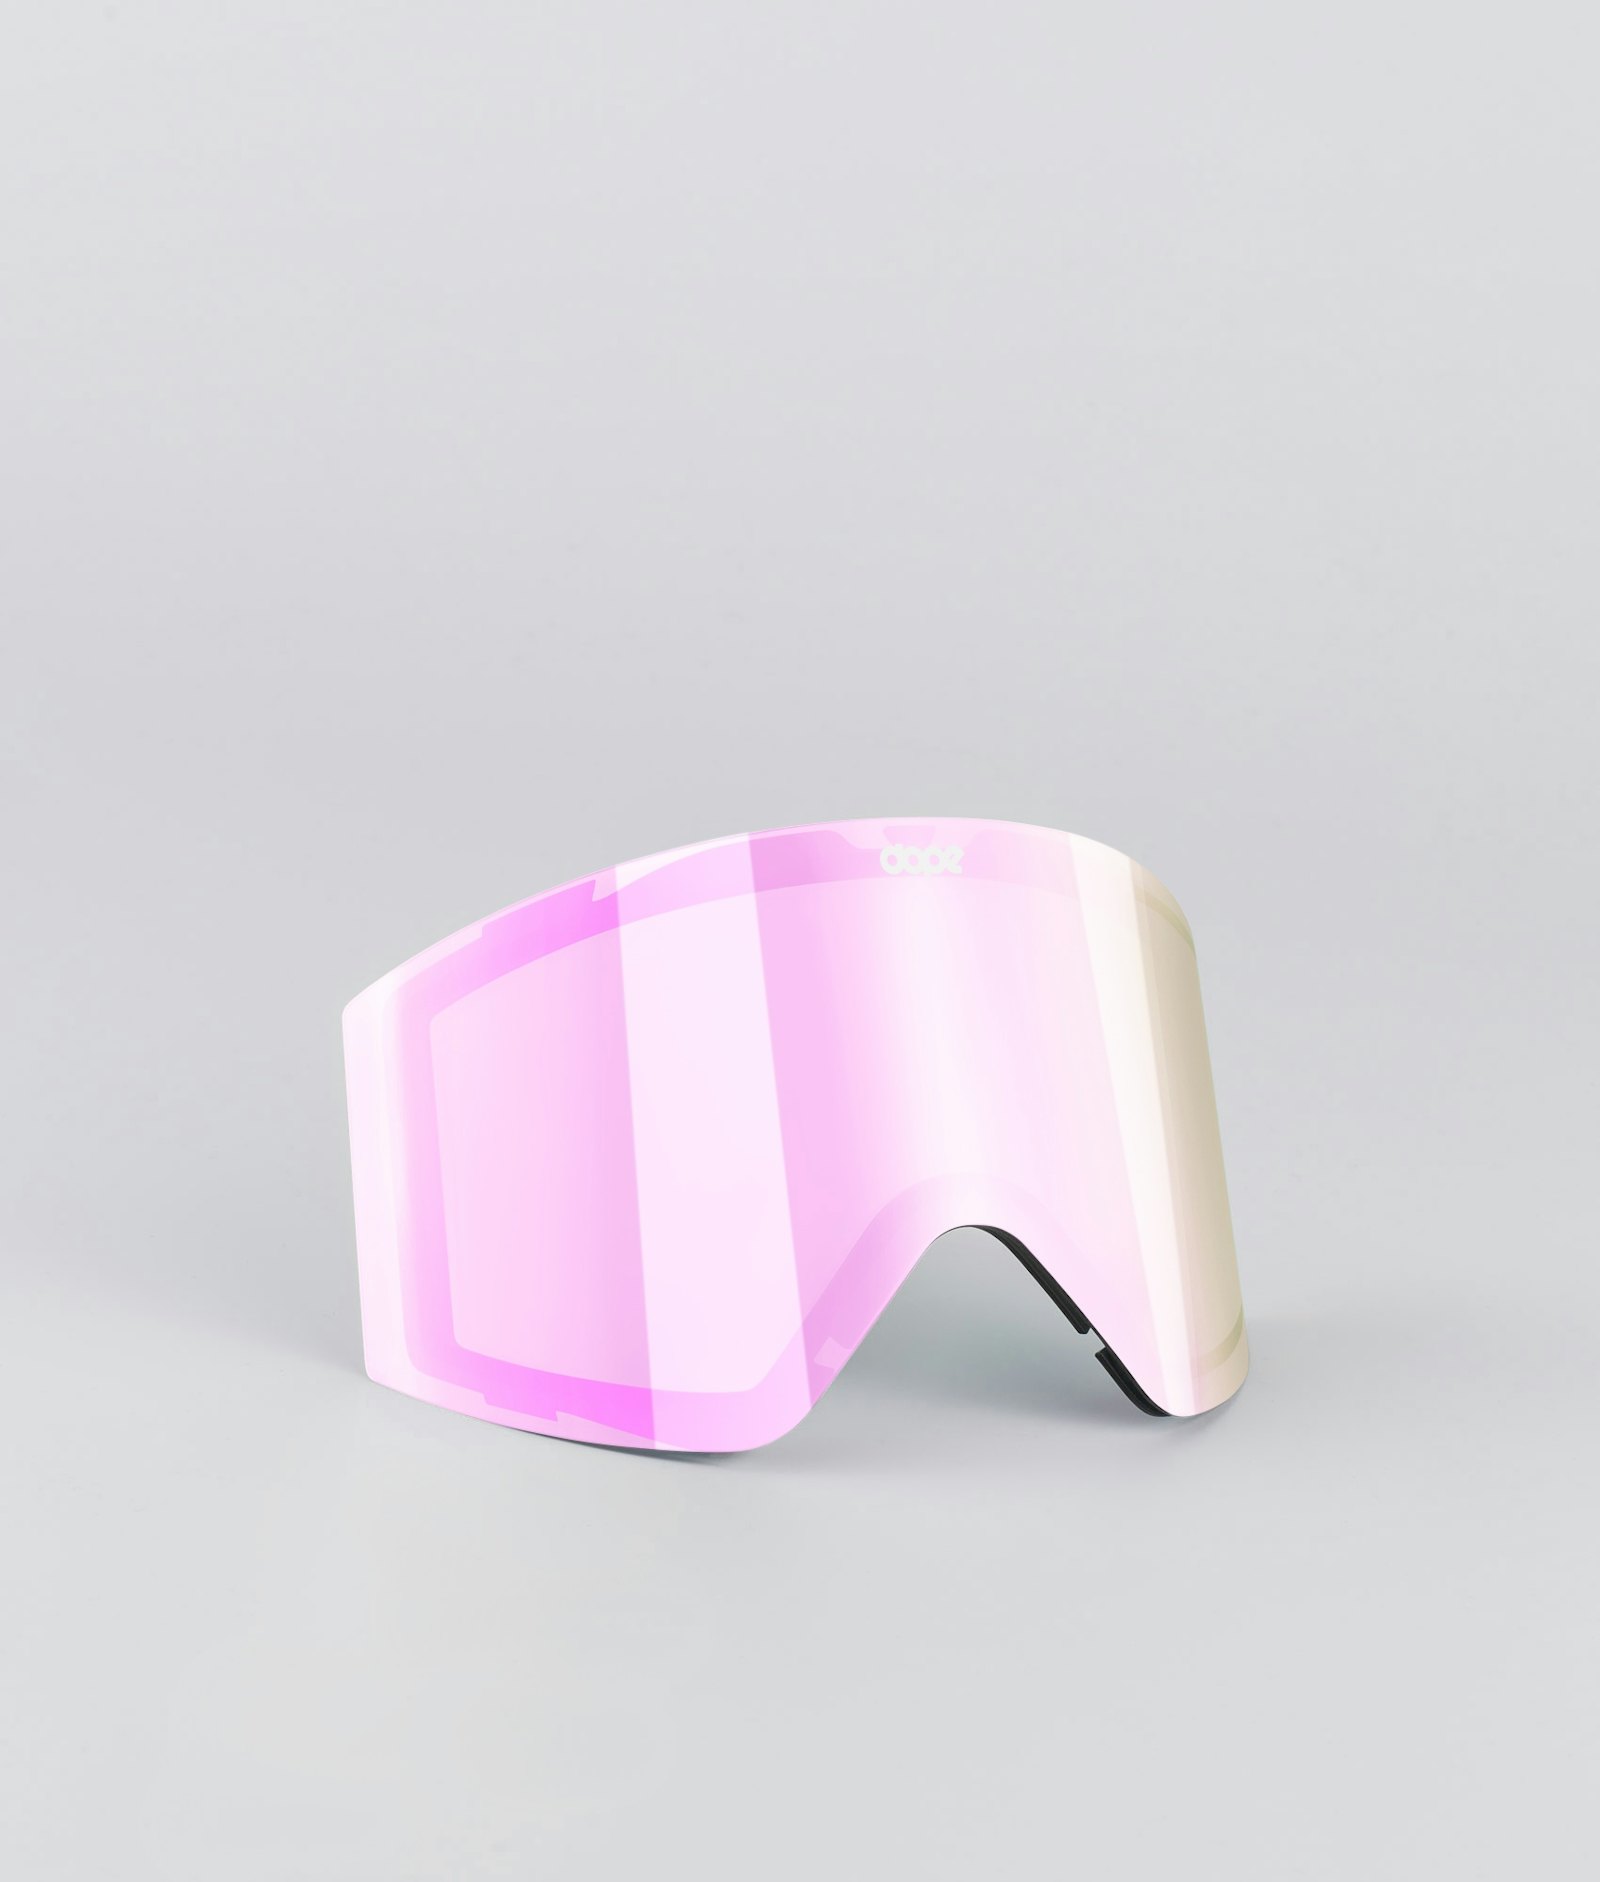 Dope Sight 2020 Goggle Lens Replacement Lens Ski Pink Mirror